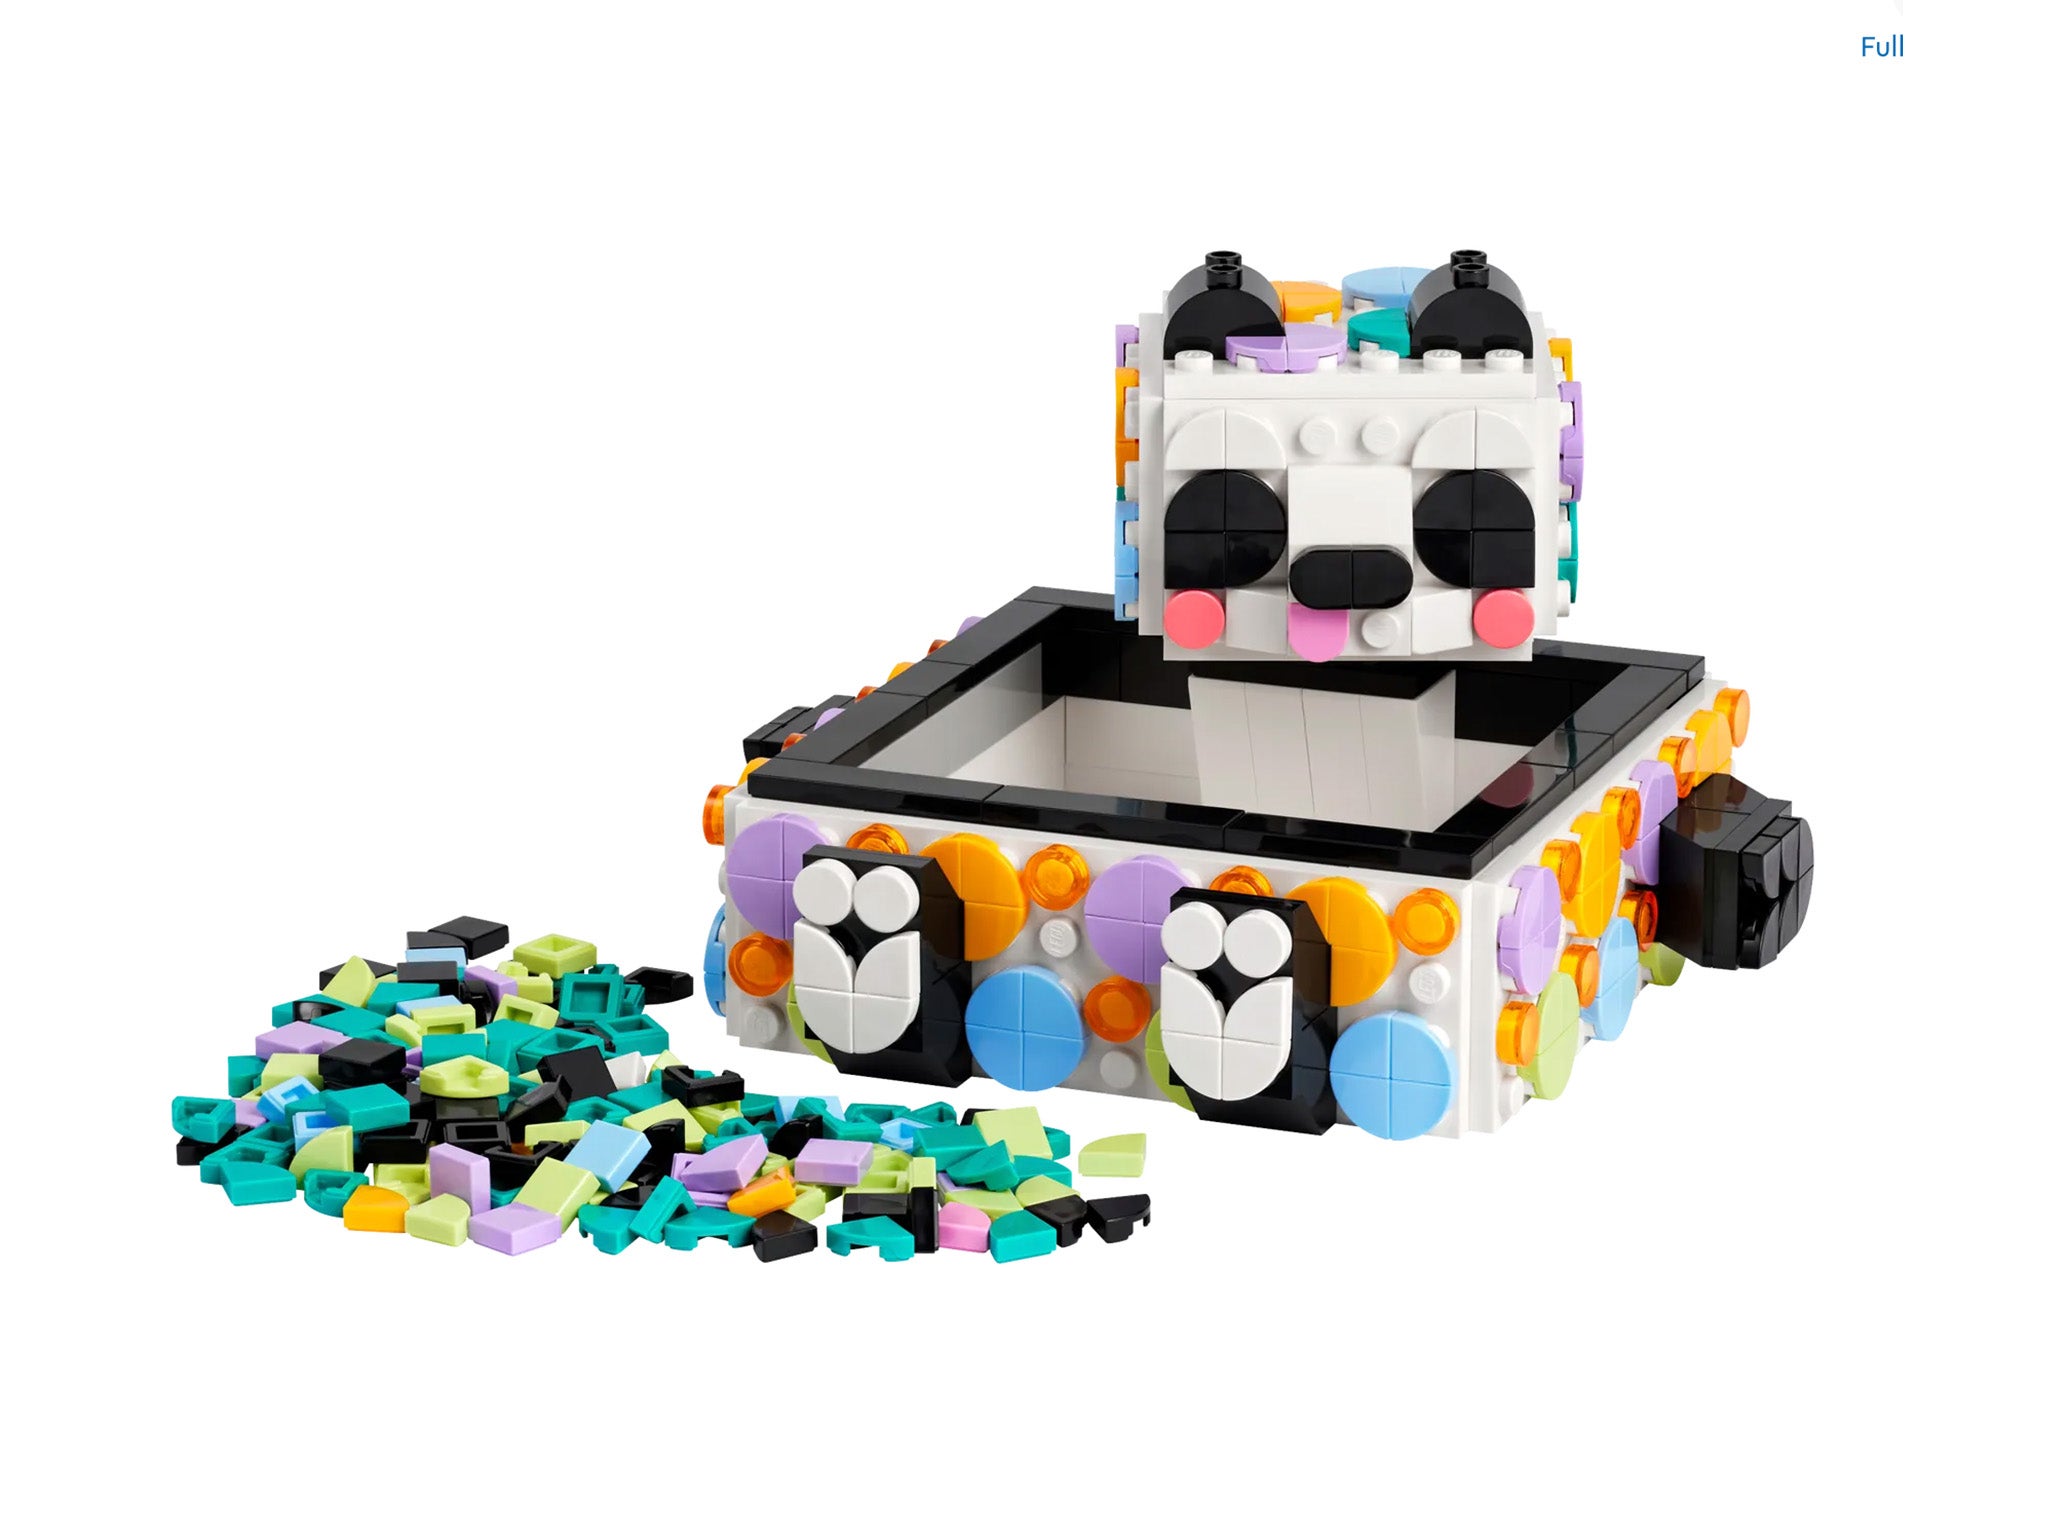 Lego dots: Spark kids' creativity with the arts and crafts range